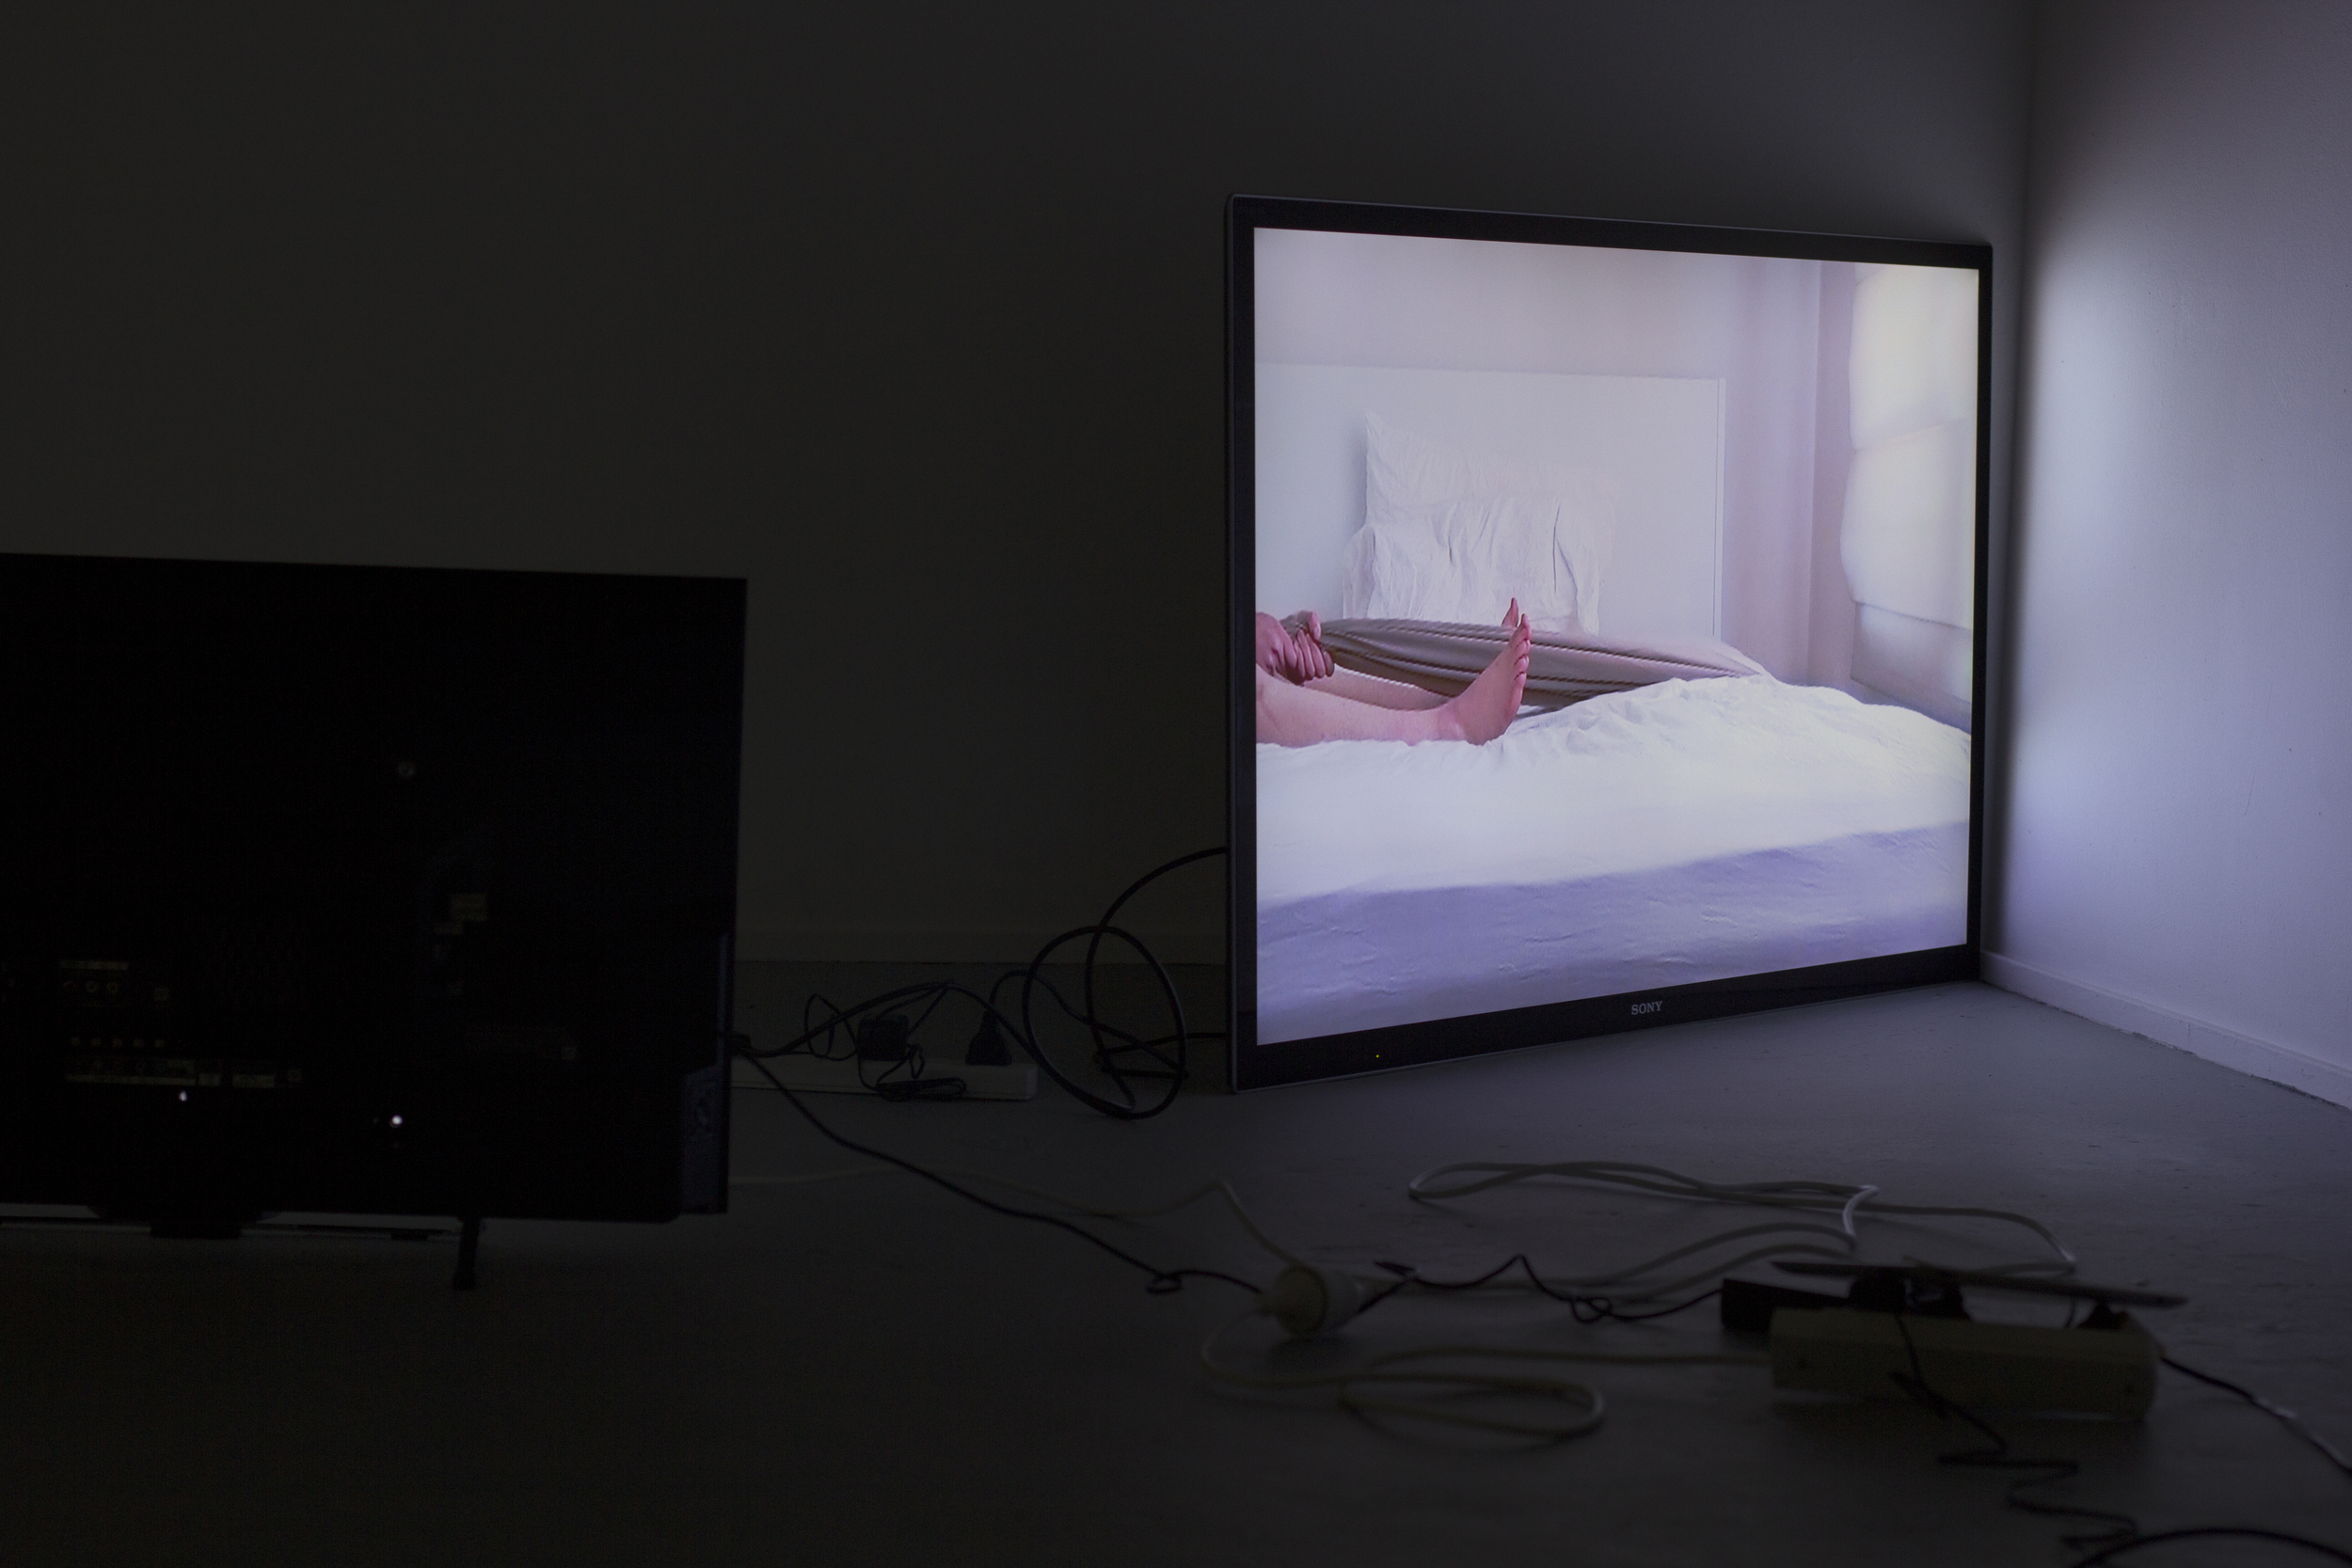    Suspended, &nbsp; 2015, 5 channel video installation, dimensions variable 